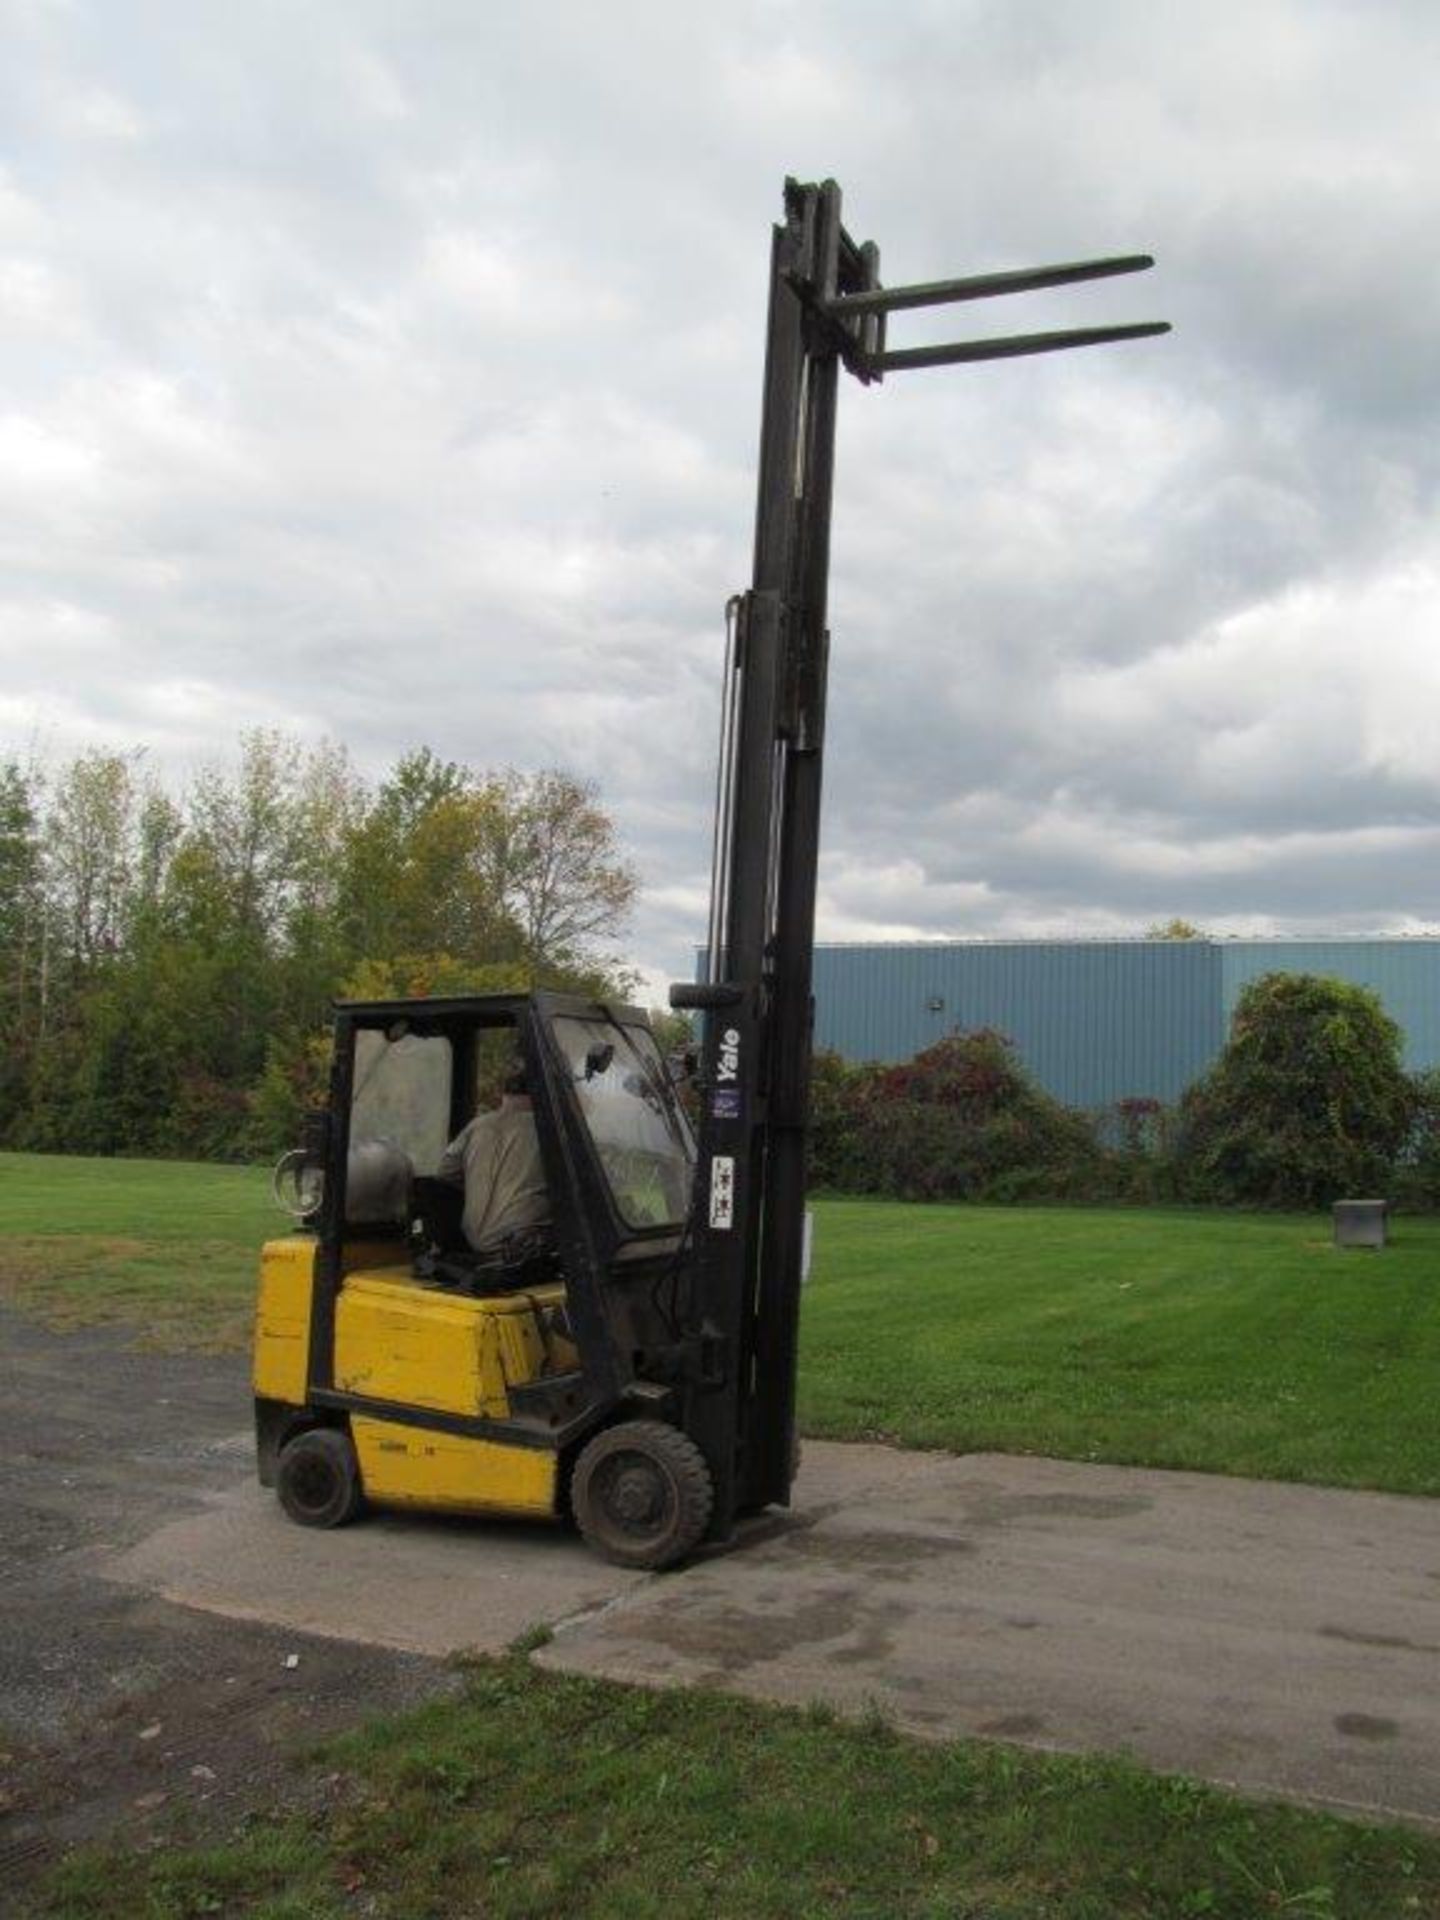 YALE PROPANE FORKLIFT MODEL: E466087, 5000 LBS CAP, INDOOR/OUTDOOR, "PROPANE TANK NOT INCLUDED" - Image 10 of 10